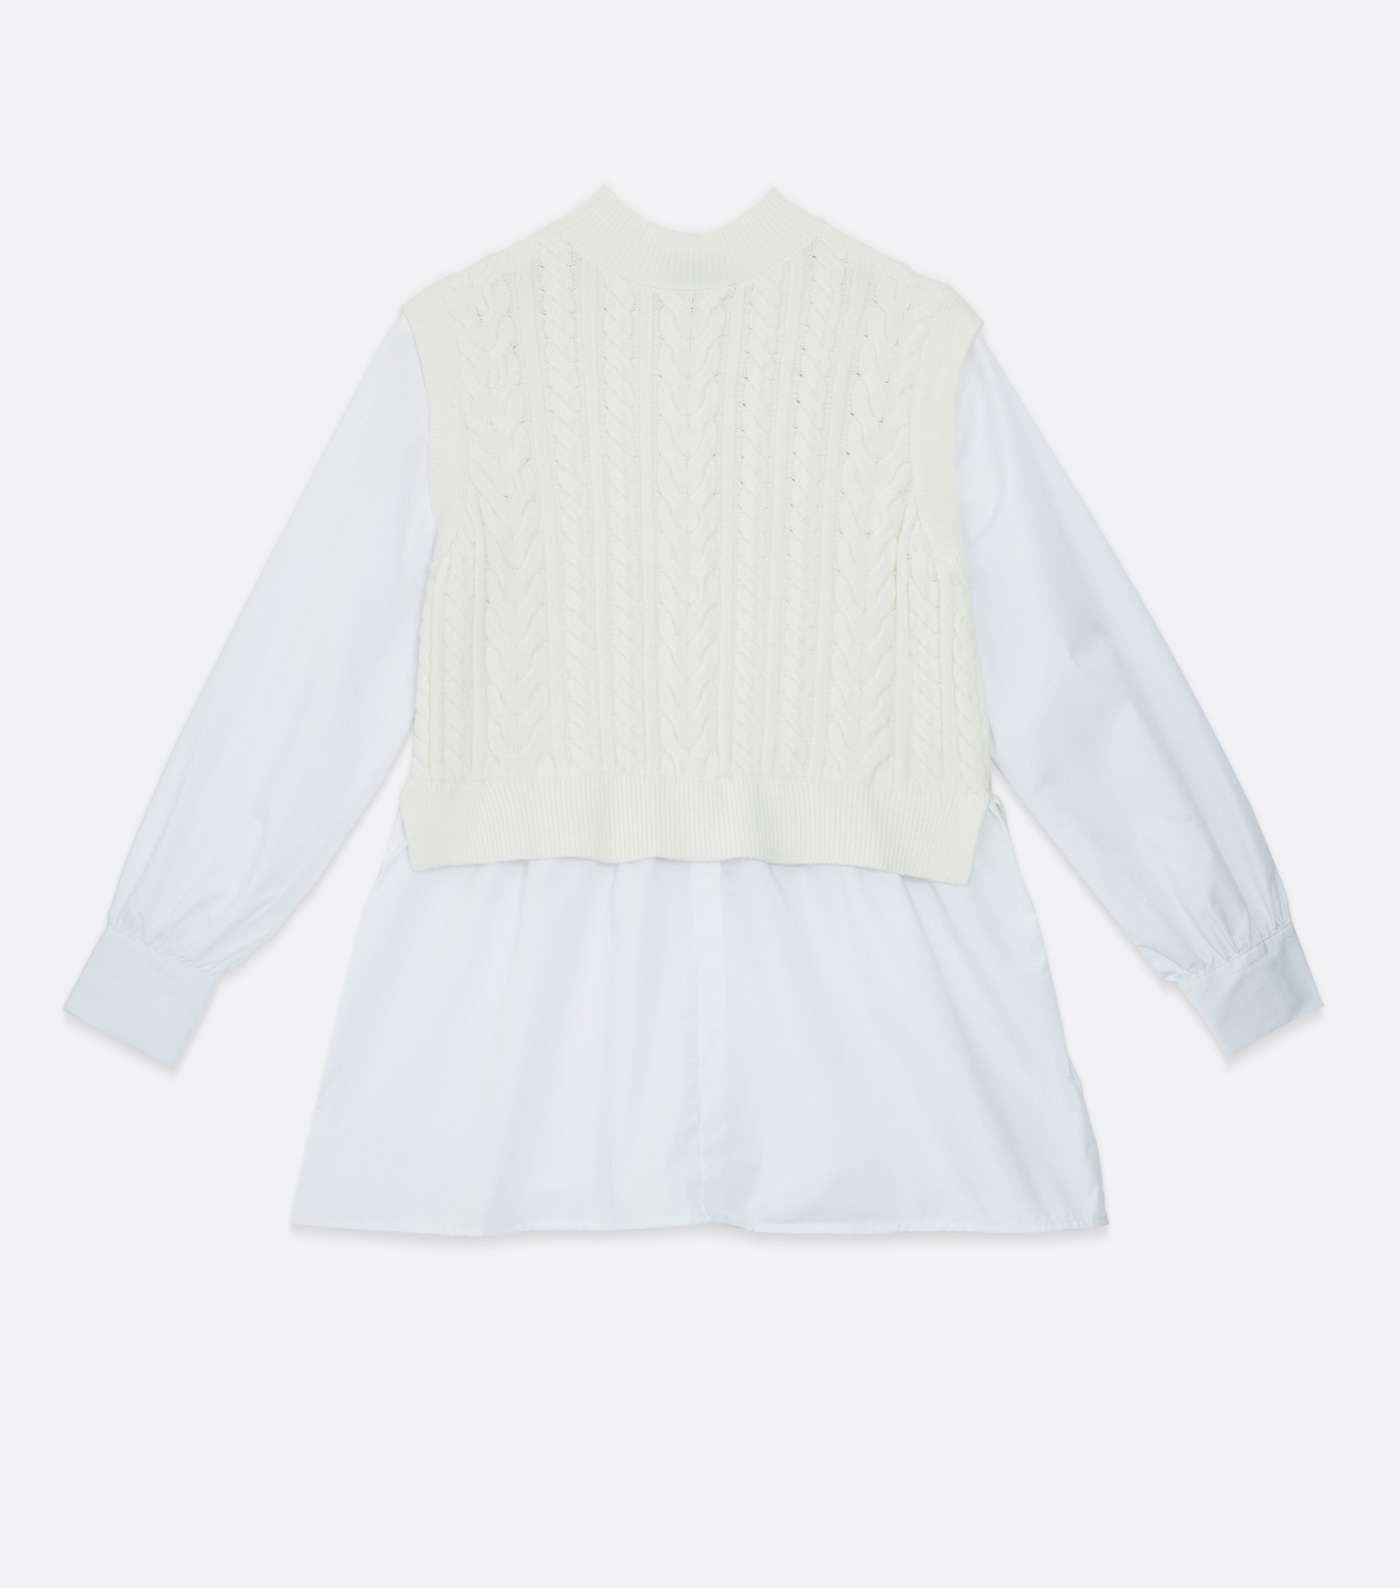 Petite Cream Cable Knit 2-in-1 Vest Jumper Shirt Image 5